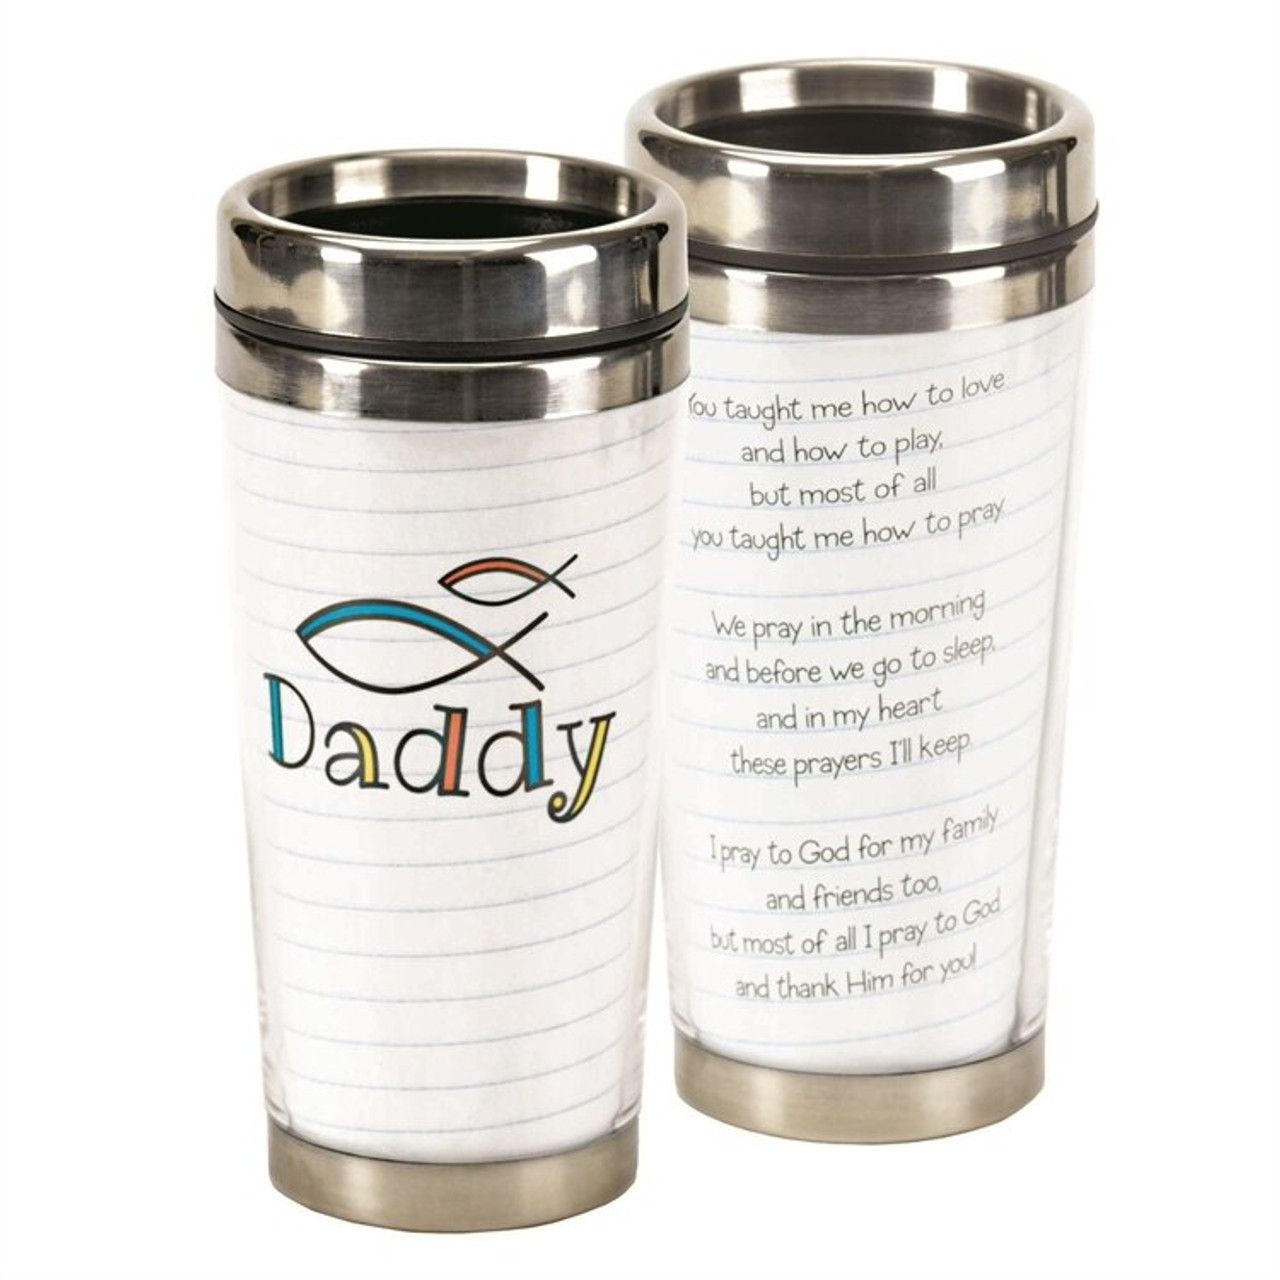 https://cdn11.bigcommerce.com/s-r75dscg/images/stencil/1280x1280/products/20819/44689/Daddy-Travel-Mug-with-poem-made-from-Stainless-Steel-holds-16-ounces-ssmug-235__07889.1561143768.jpg?c=2